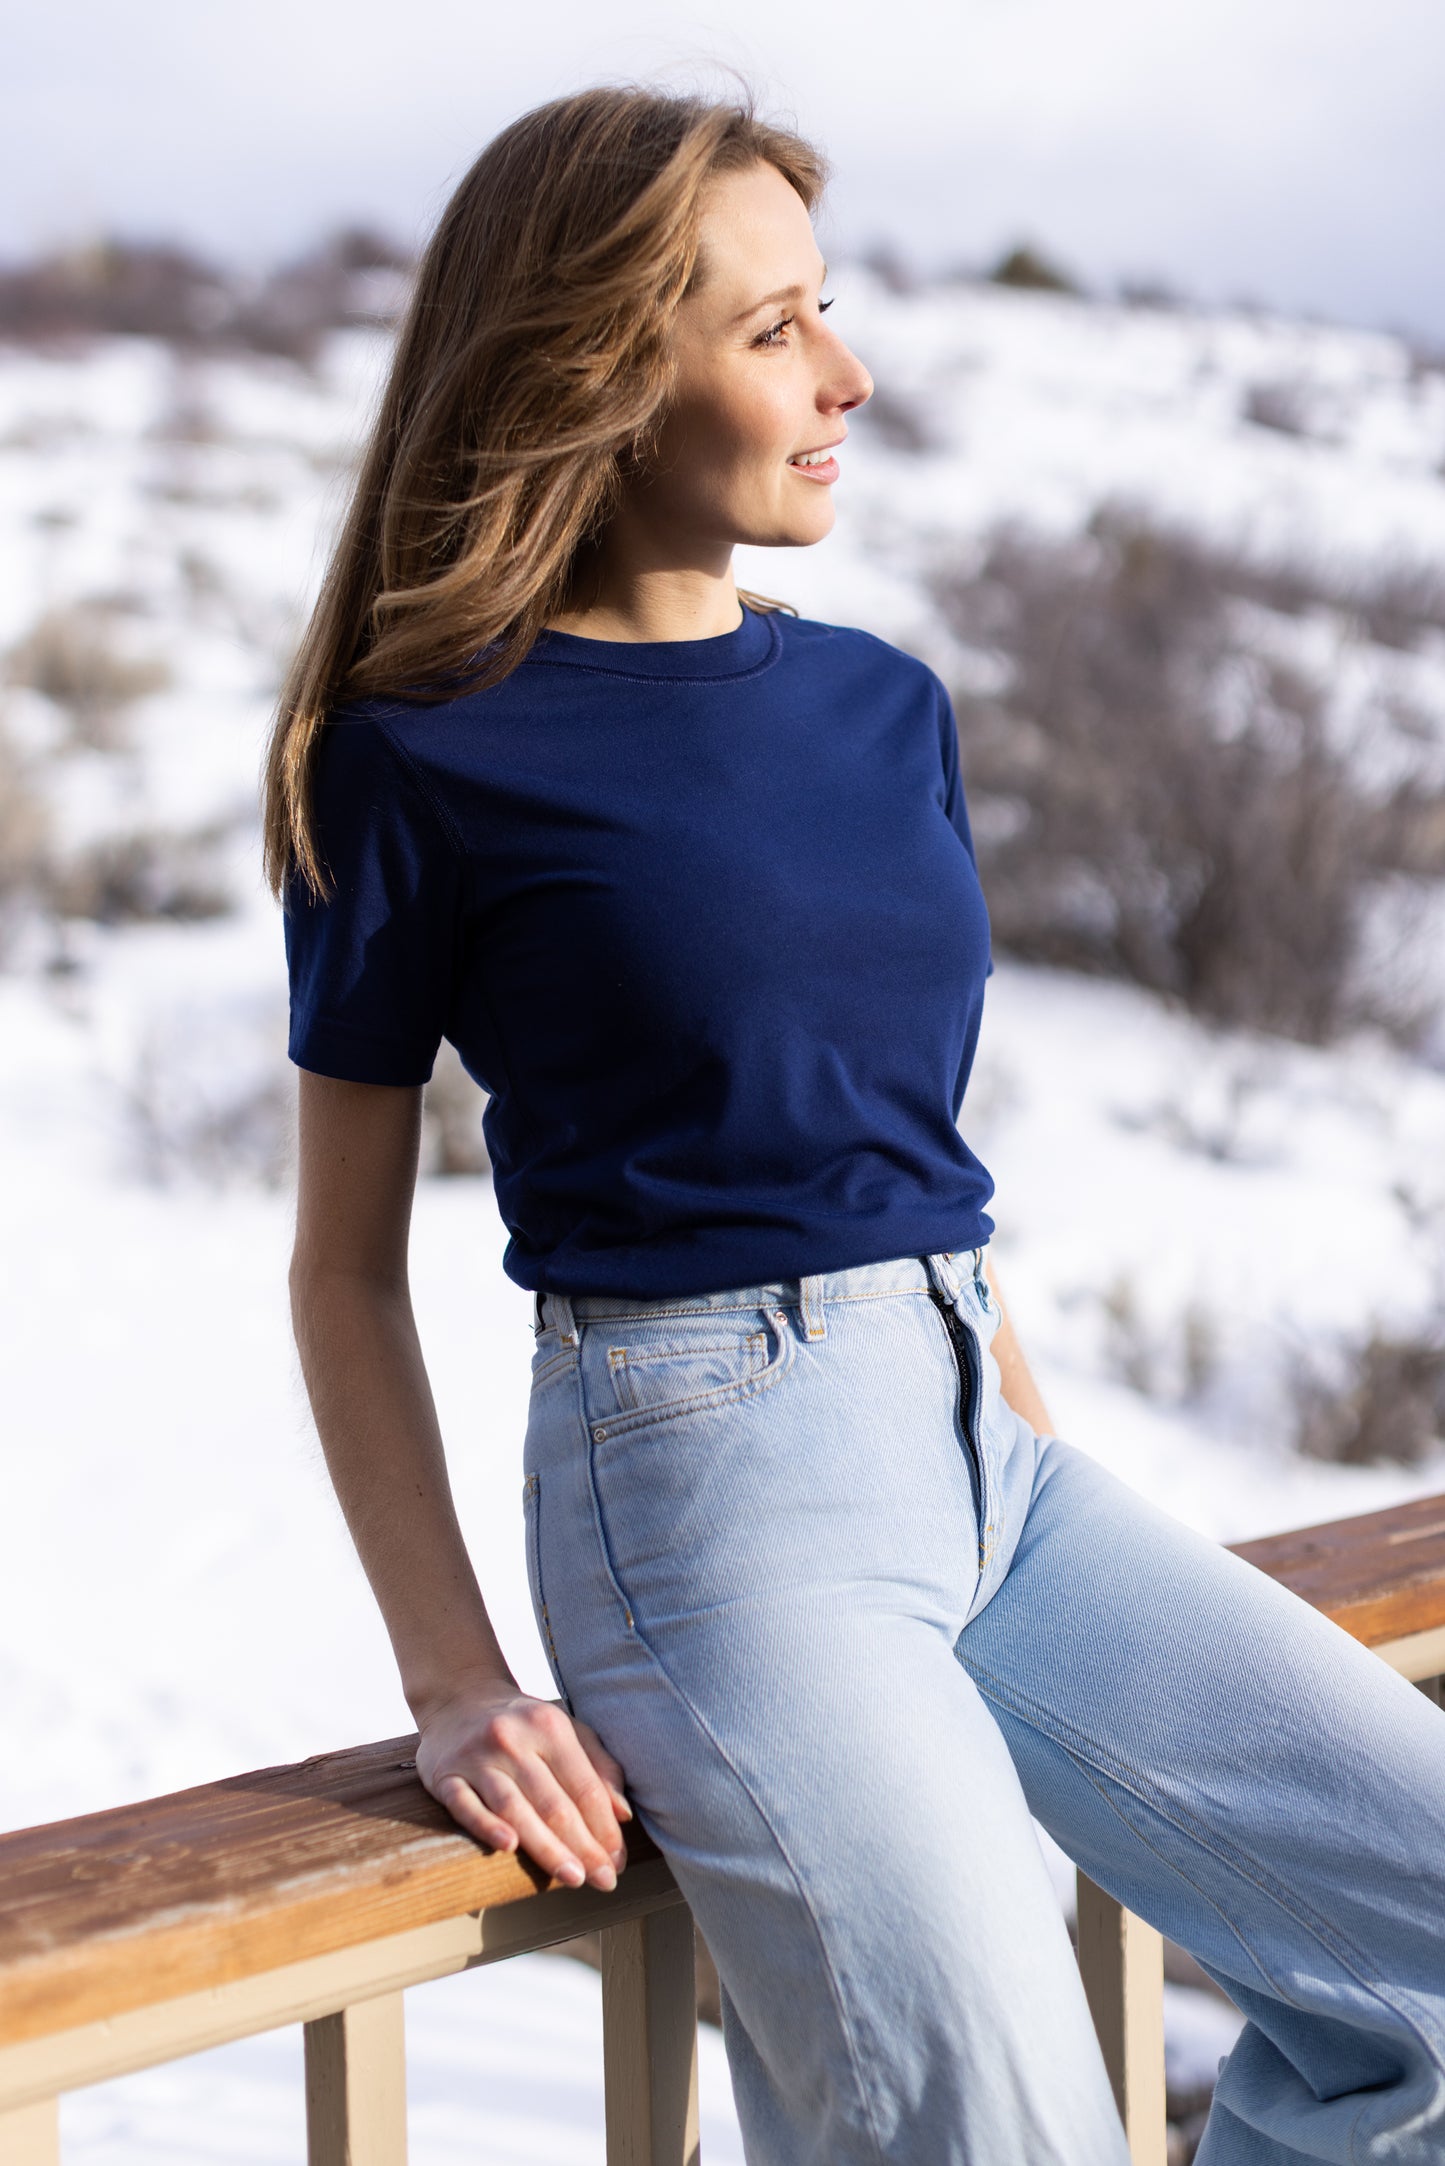 A white woman with long blonde hair is wearing the No Limbits Adaptive Women's Navy Sensory Tee. She leans on a balcony. A snowy hill is in the background.